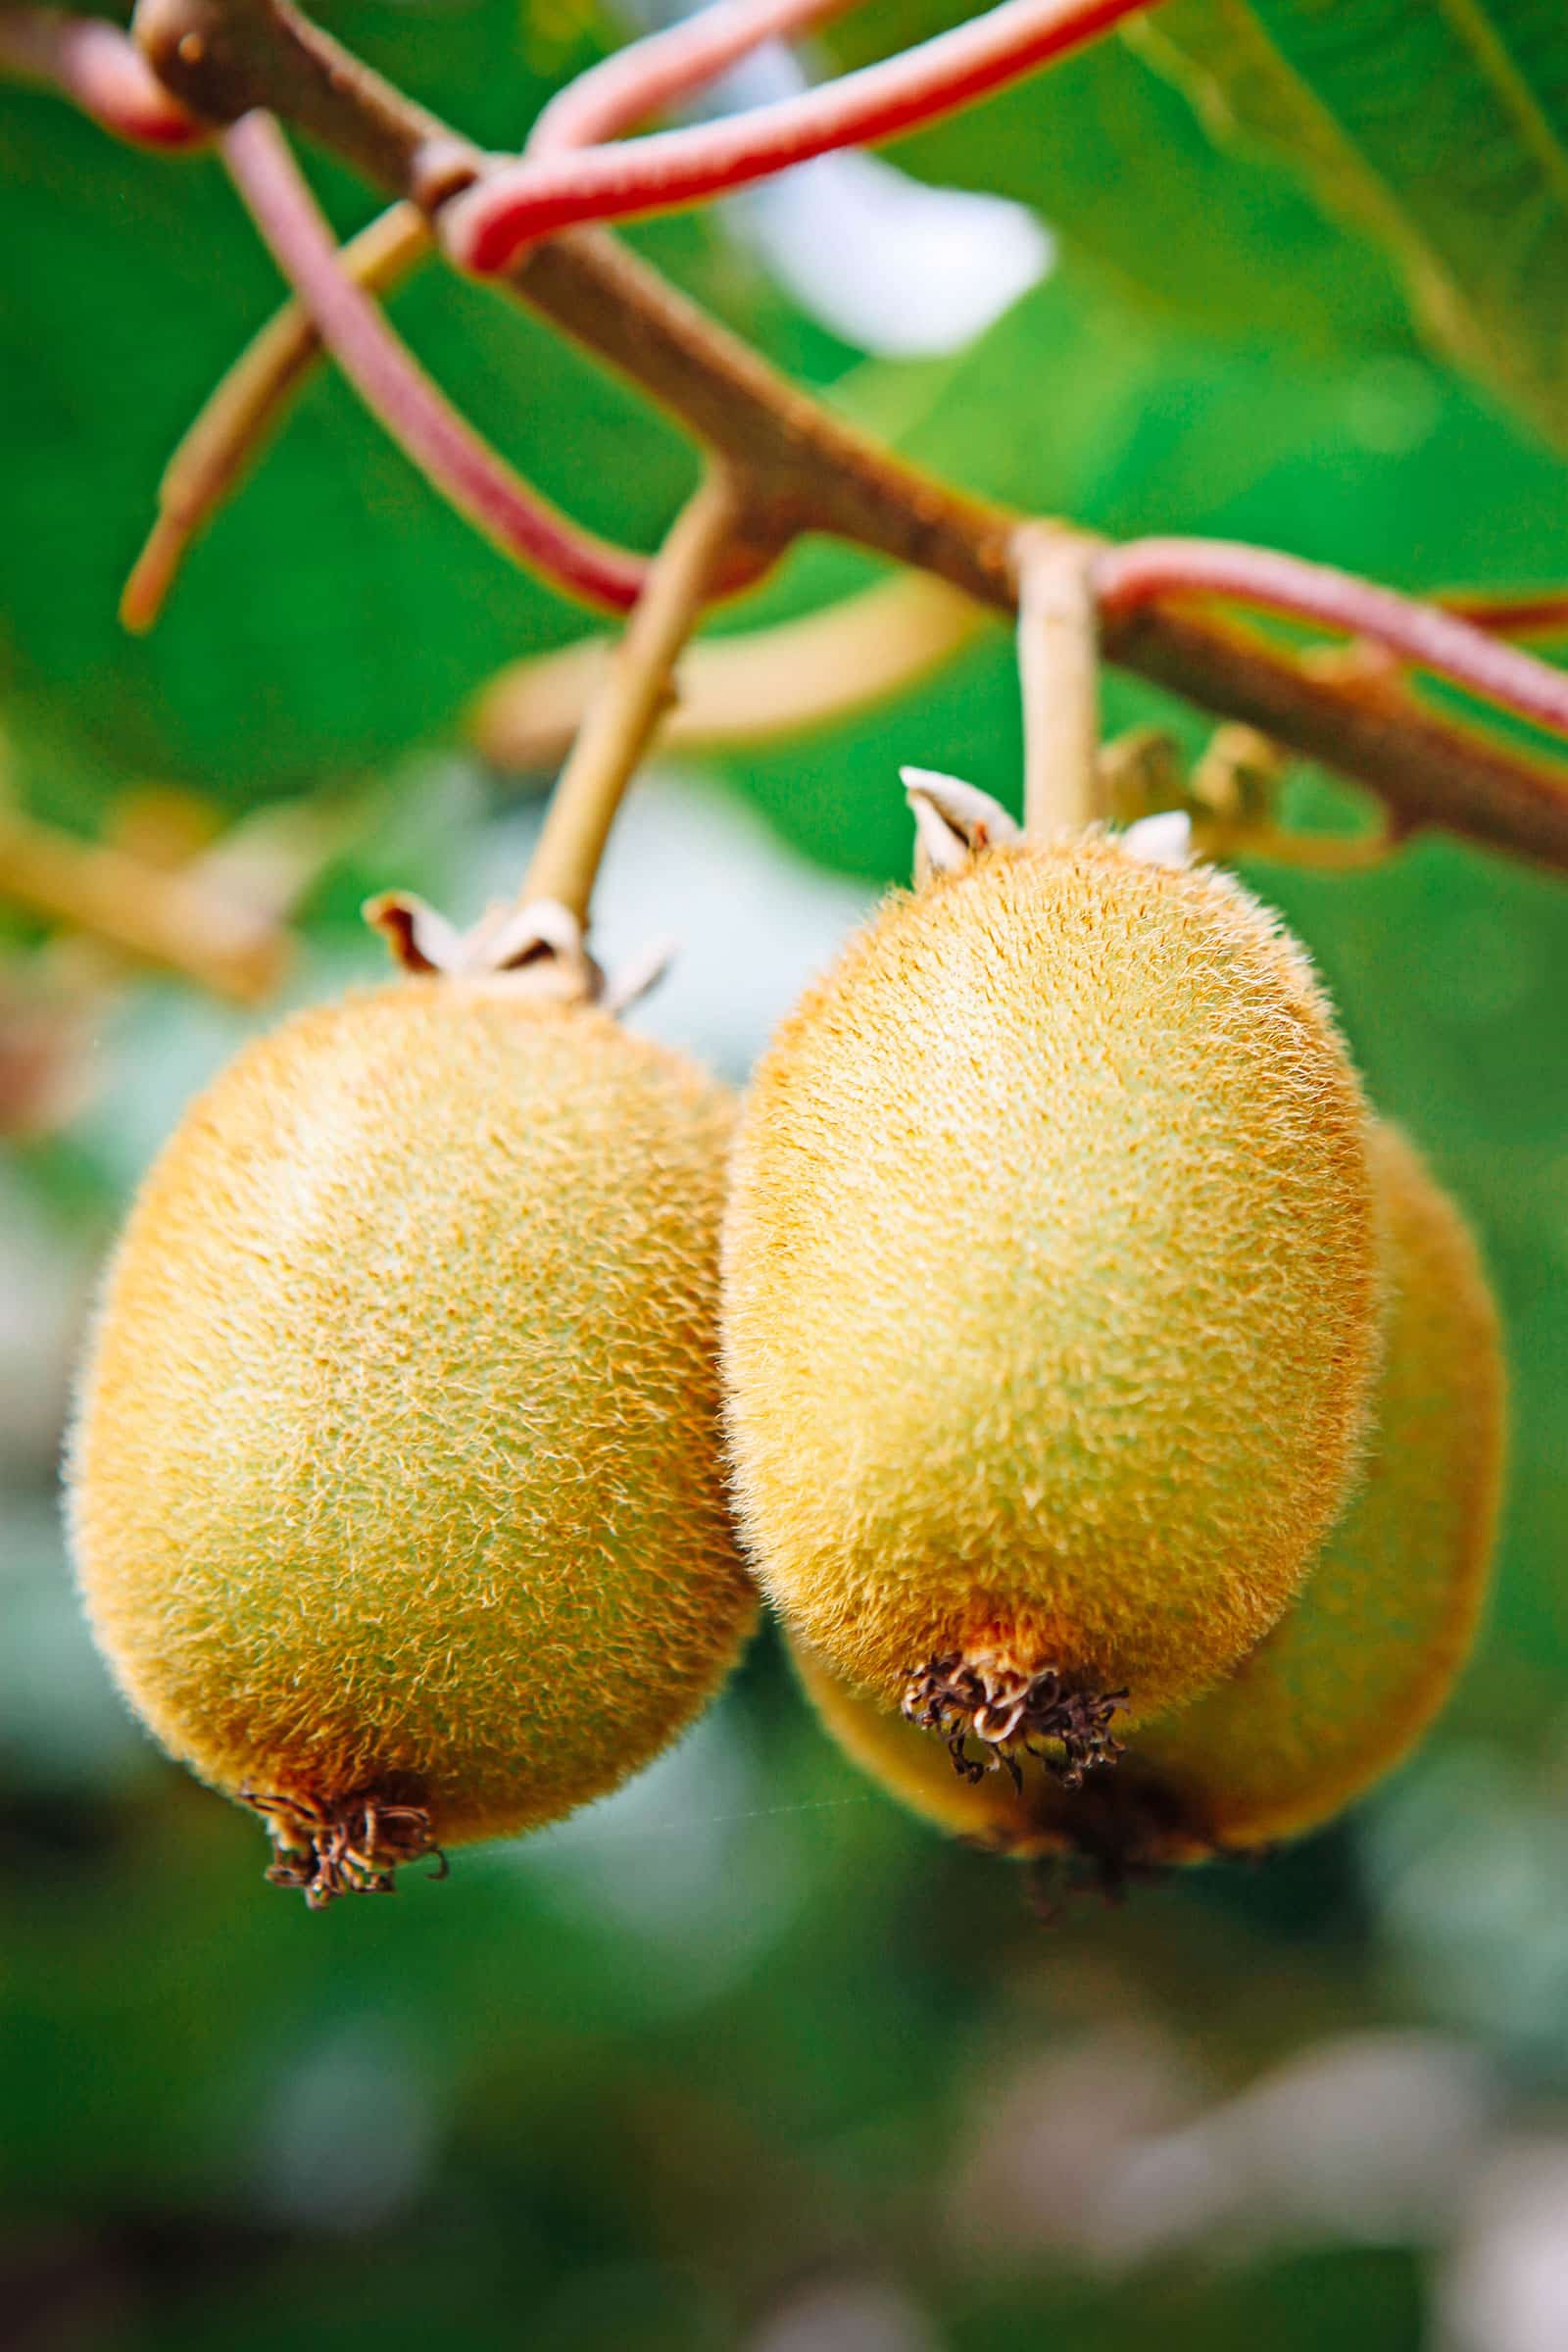 Three kiwifruits growing on a branch